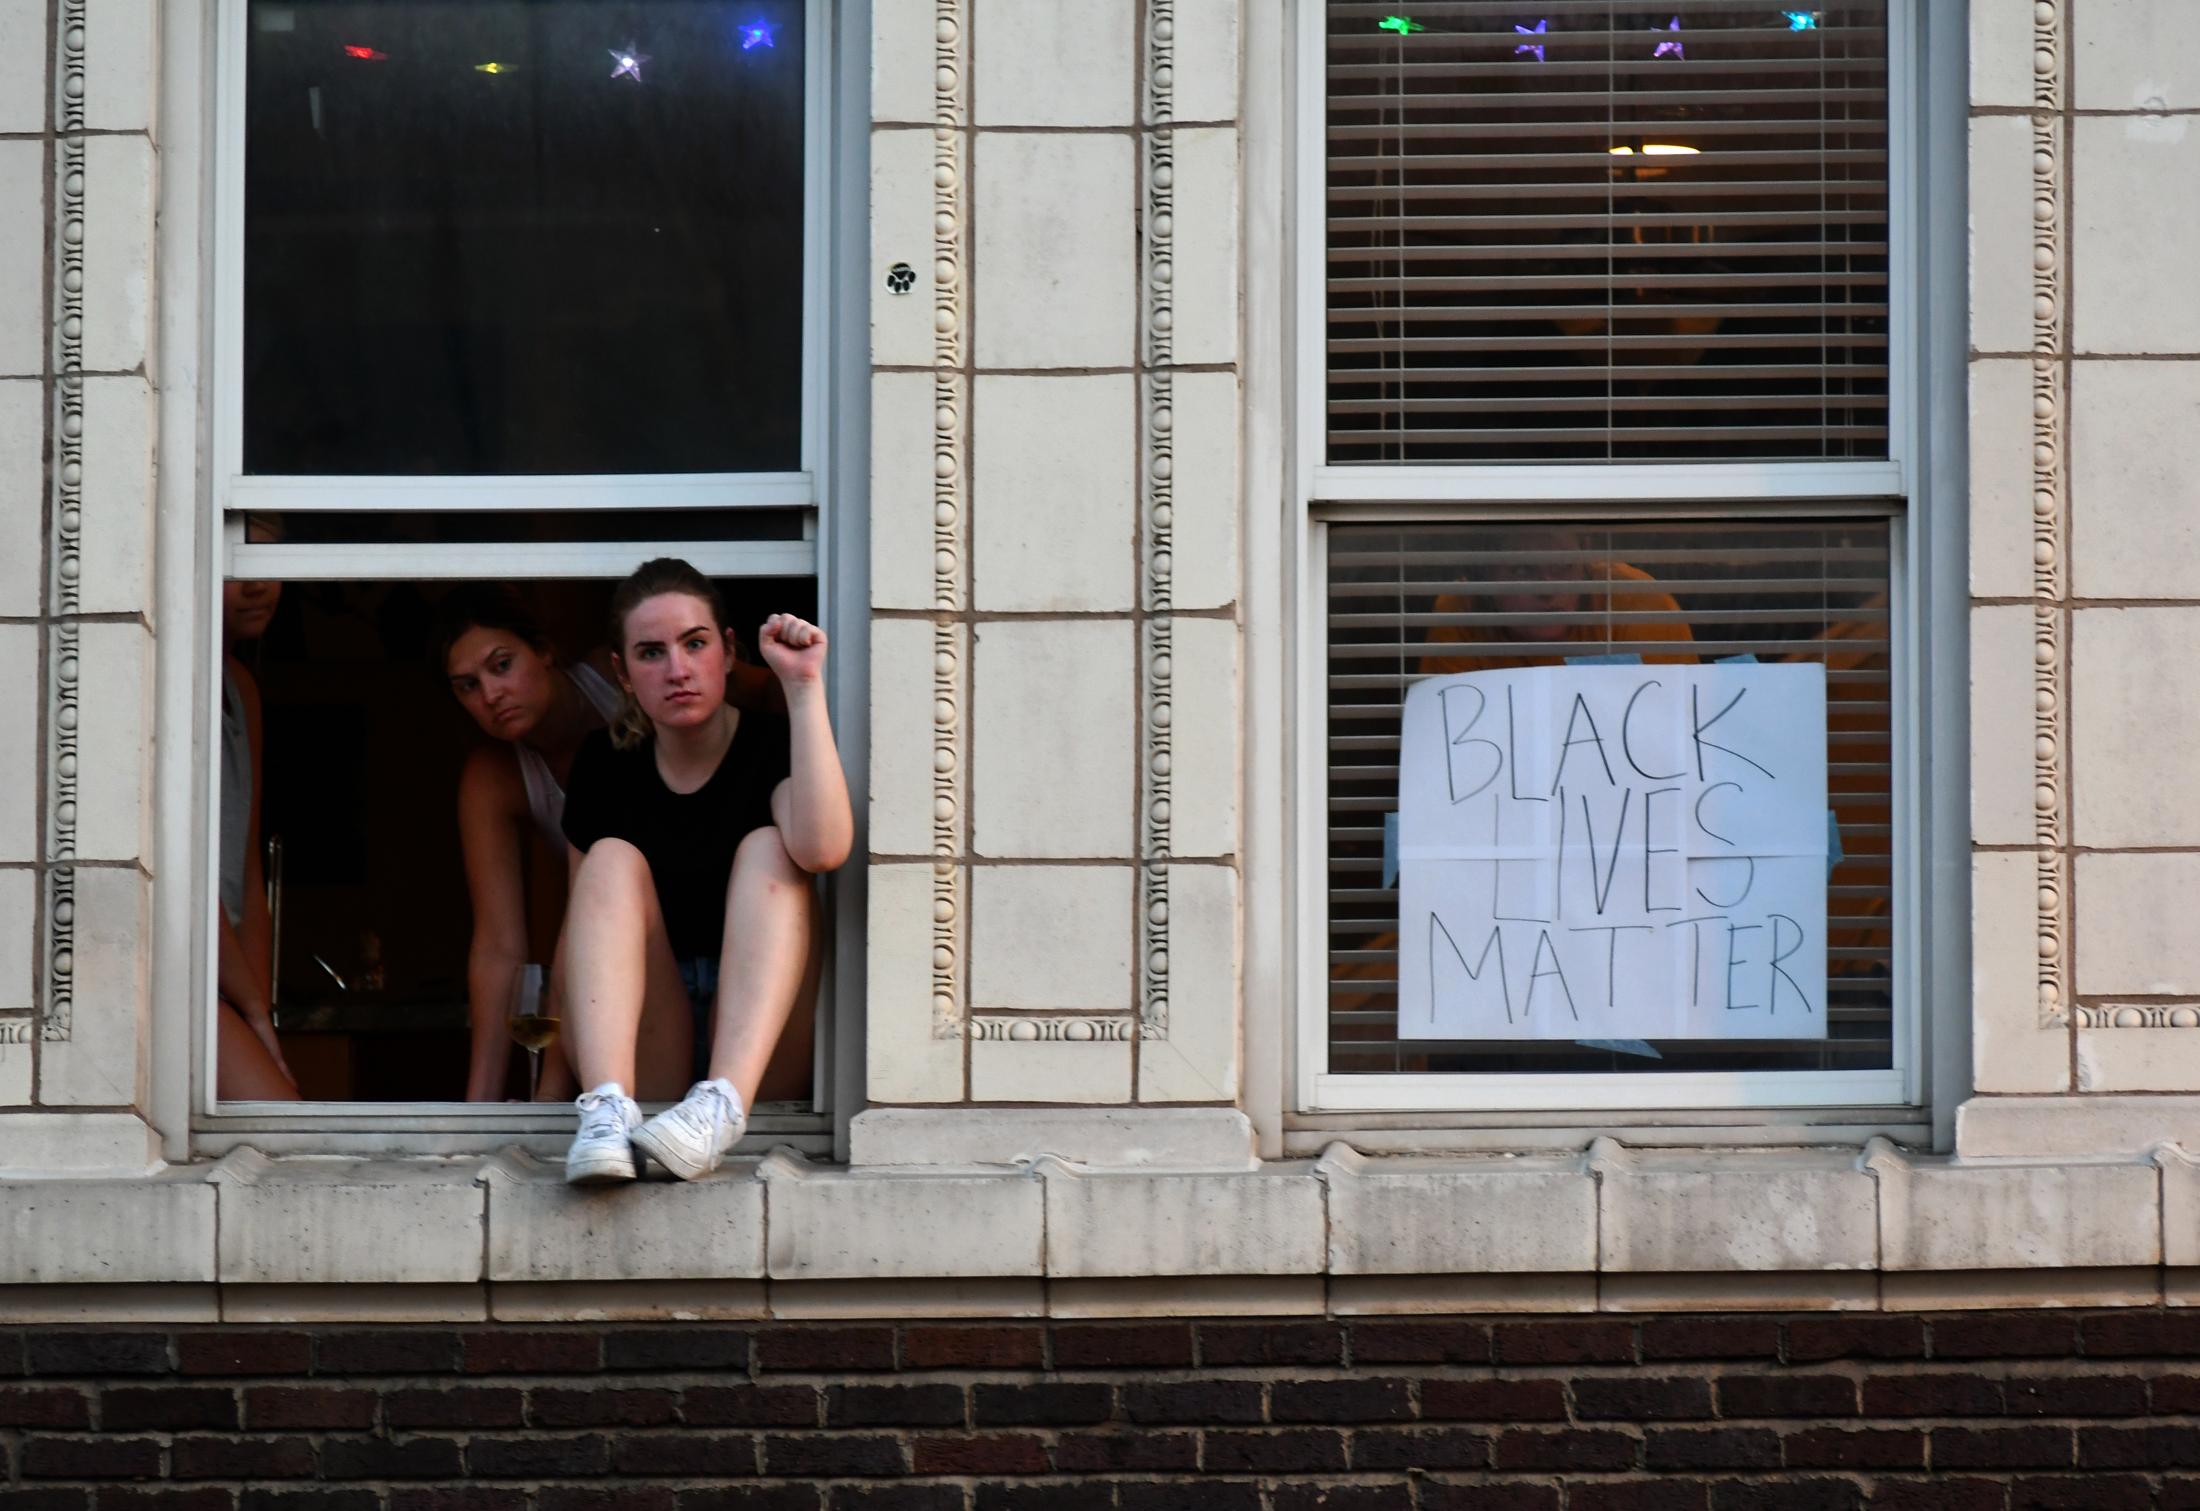 A Summer of Social Justice - From a building, people watch in support of protesters...